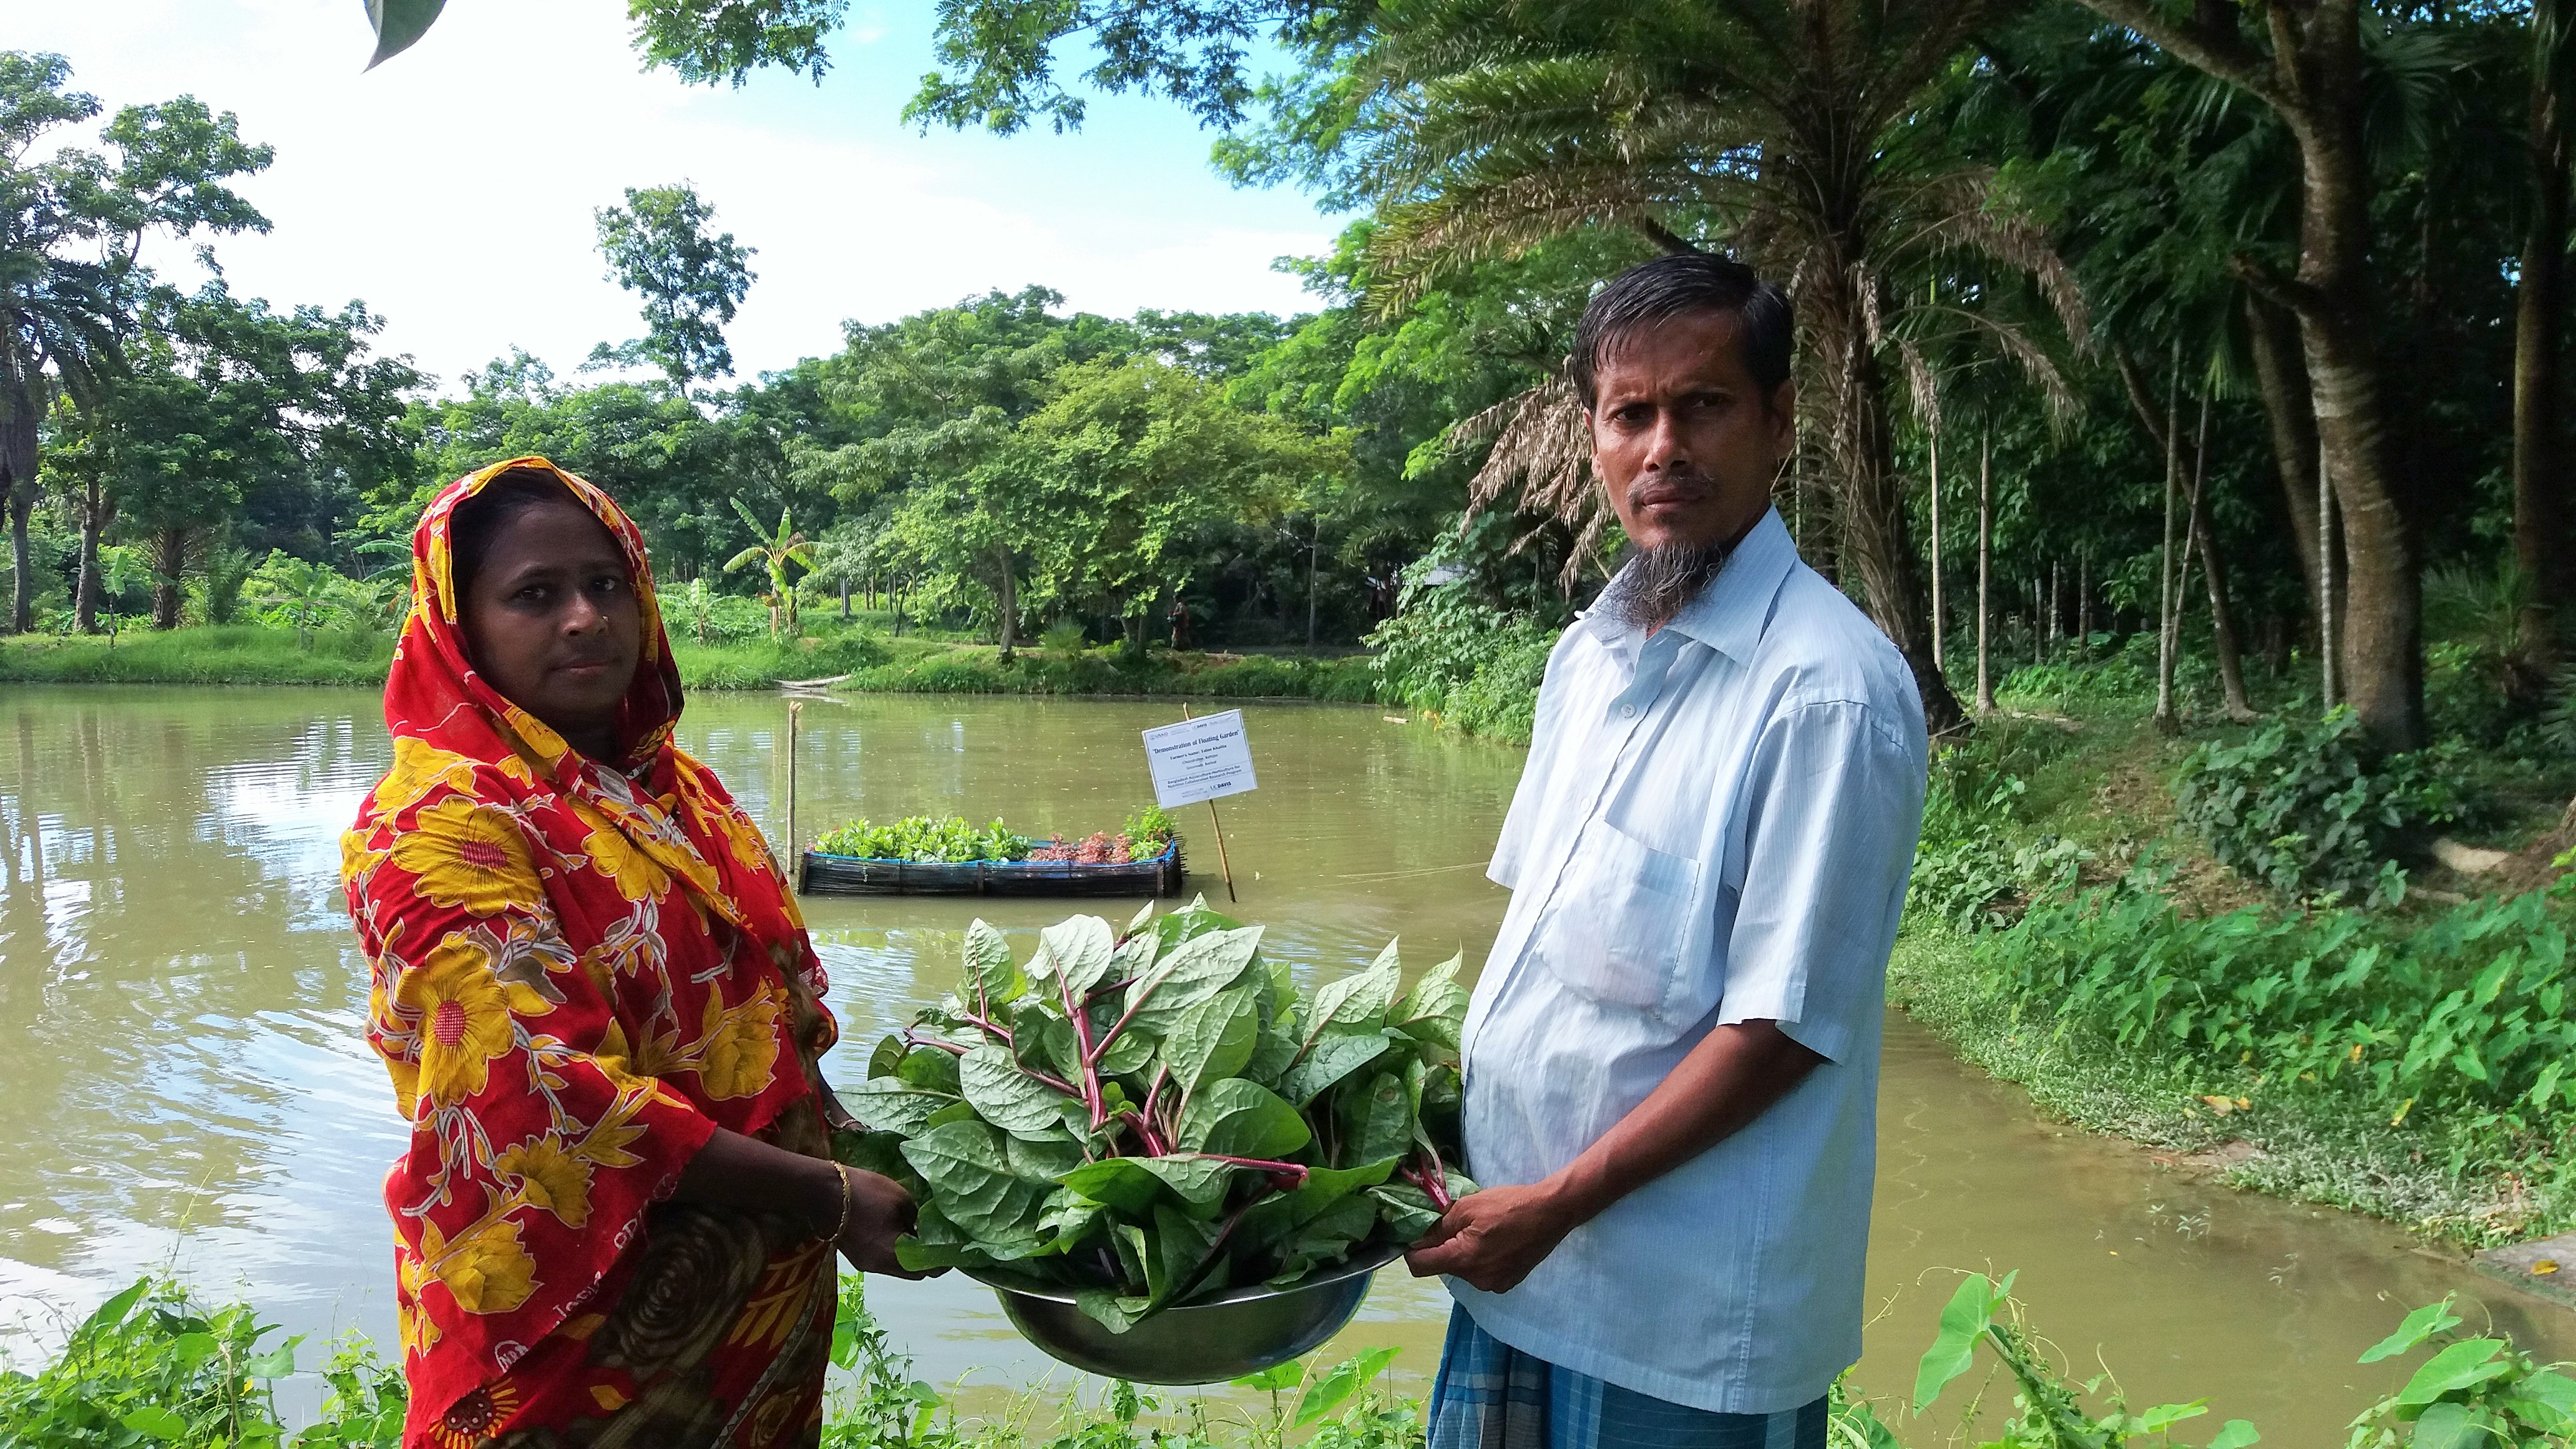 Man and woman hold basket of leafy green vegetables in front of pond with floating garden in Bangladesh